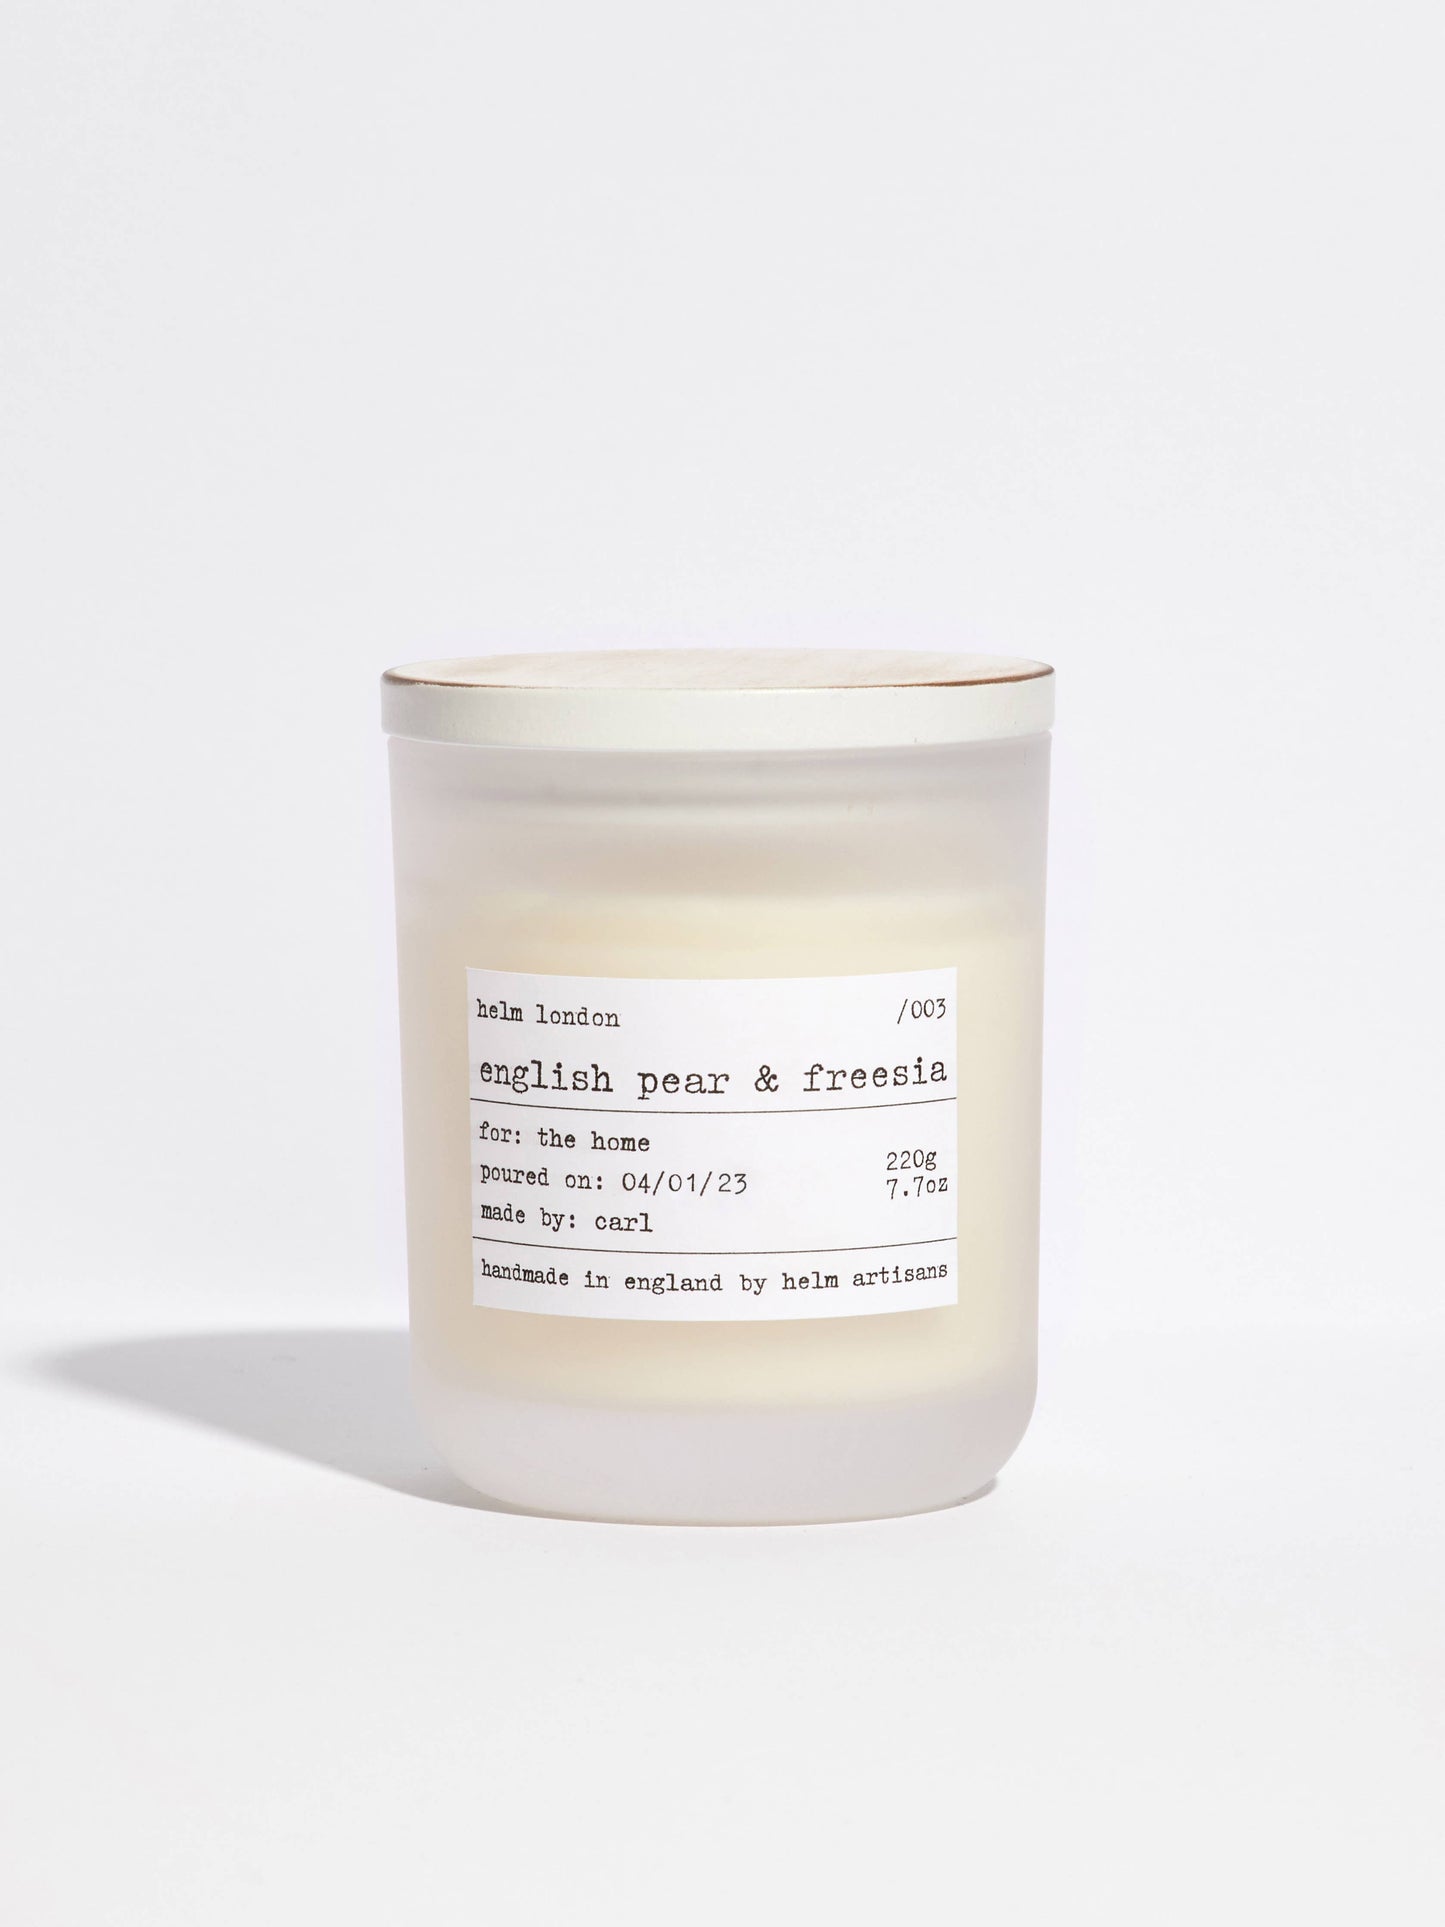 Helm London English Pear & Freesia Soy Wax Candle at Joetie Home Fragrance. Luxury Handmade Apothecary Soy Candles